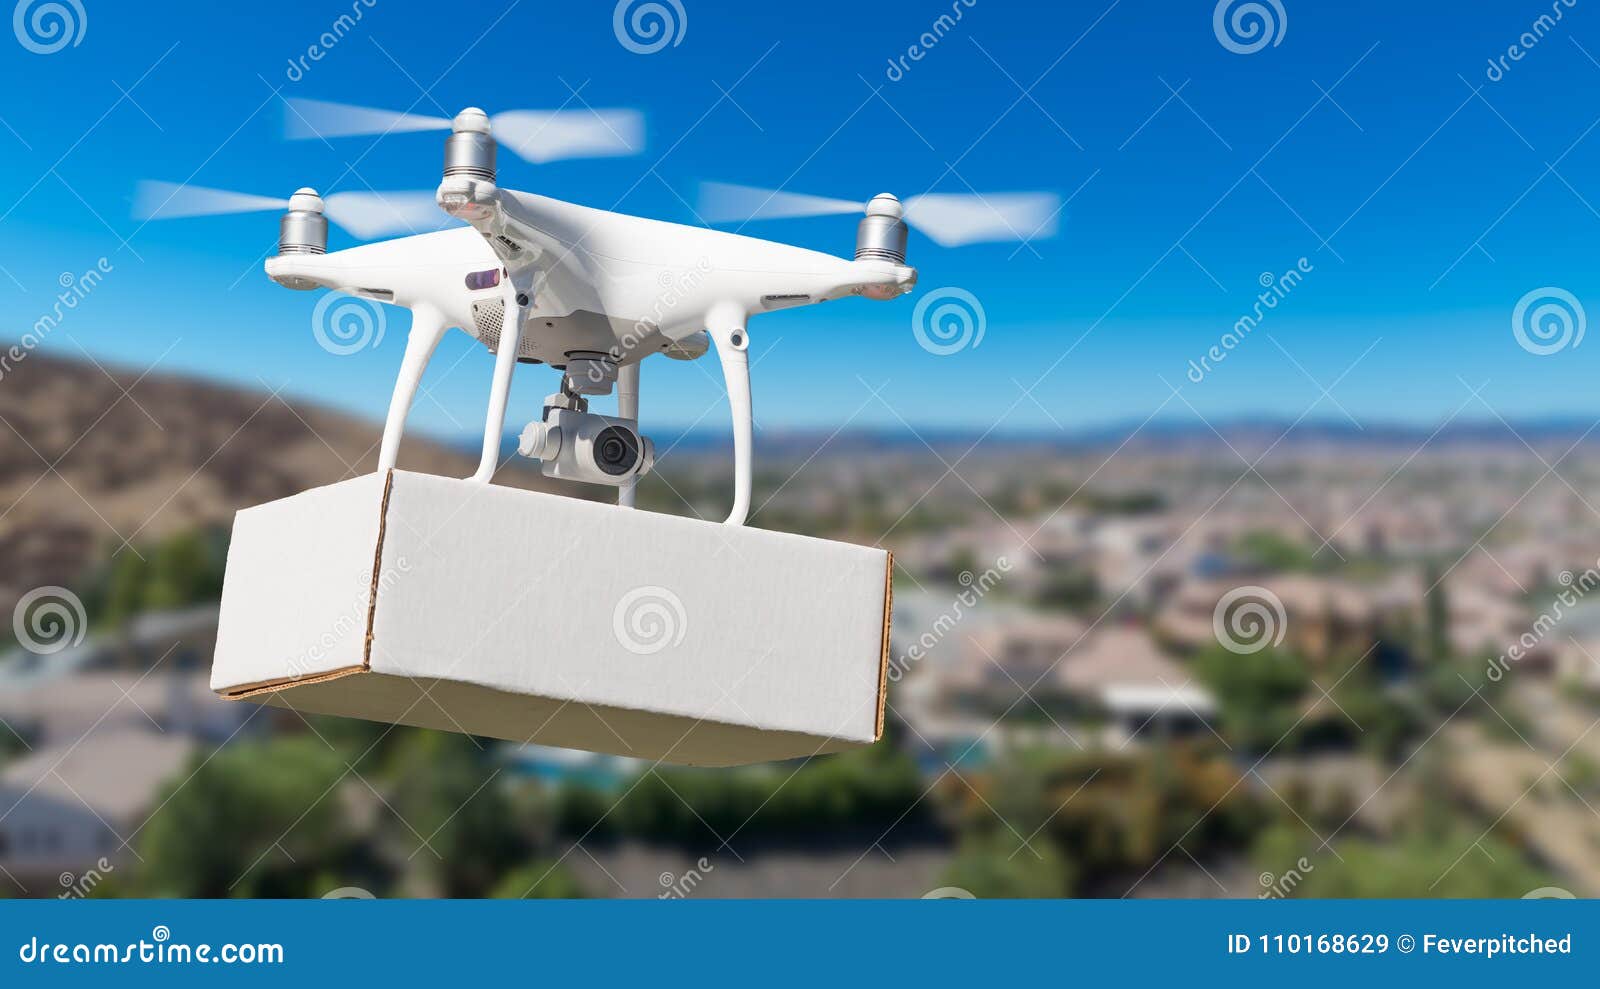 unmanned aircraft system uas quadcopter drone carrying blank box